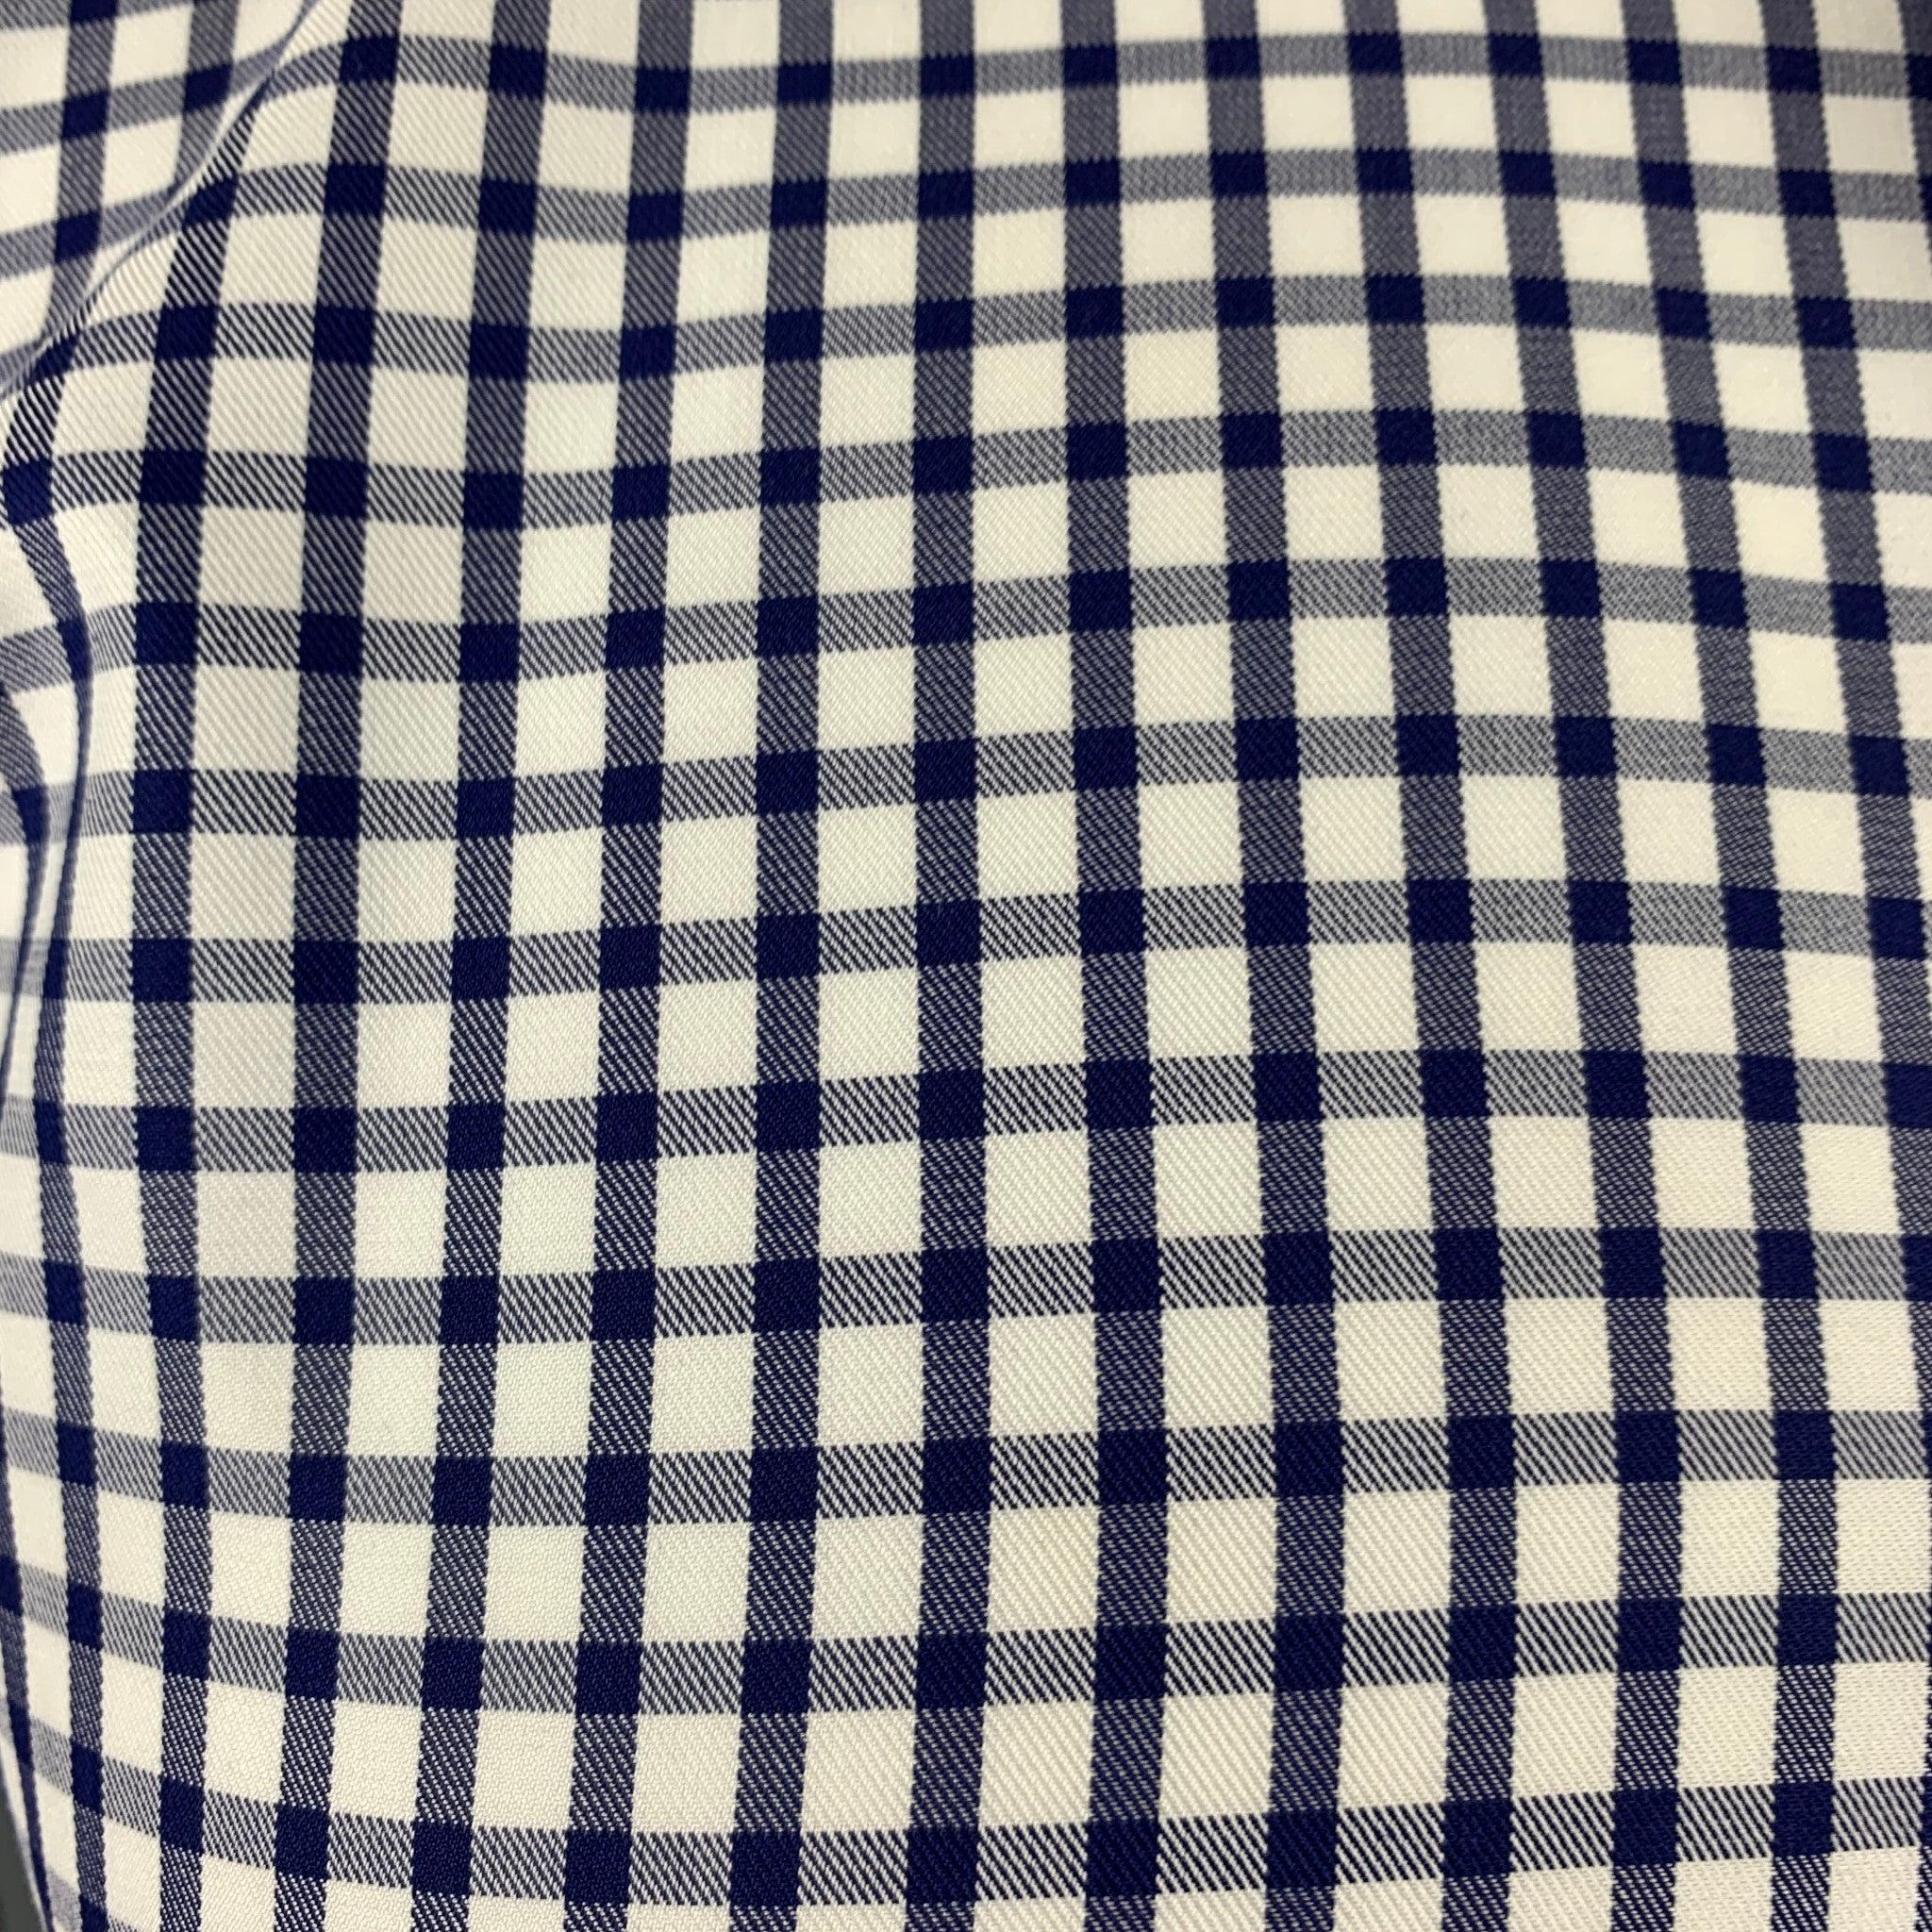 ETRO long sleeve shirt in a blue and white fabric featuring all over checkered pattern, one button angle cuffs, and a button closure. Made in Italy.Very Good Pre-Owned Condition. Signs of wear on collar. 

Marked:   IT 39 

Measurements: 
